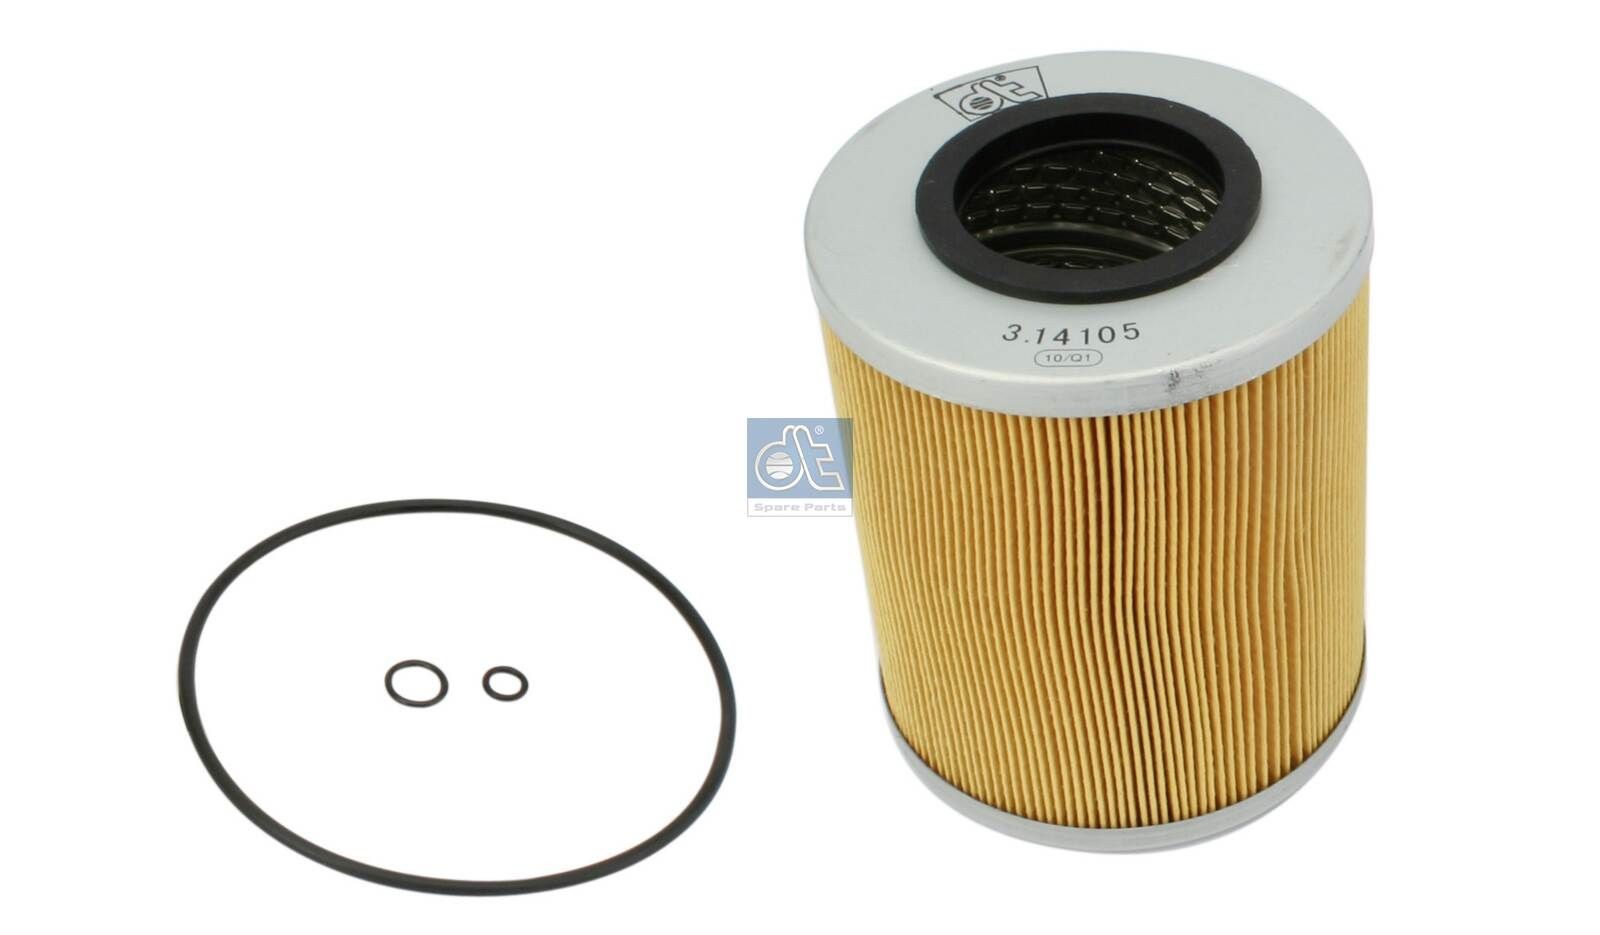 HU 1381 x DT Spare Parts 3.14105 Oil filter 82055040098